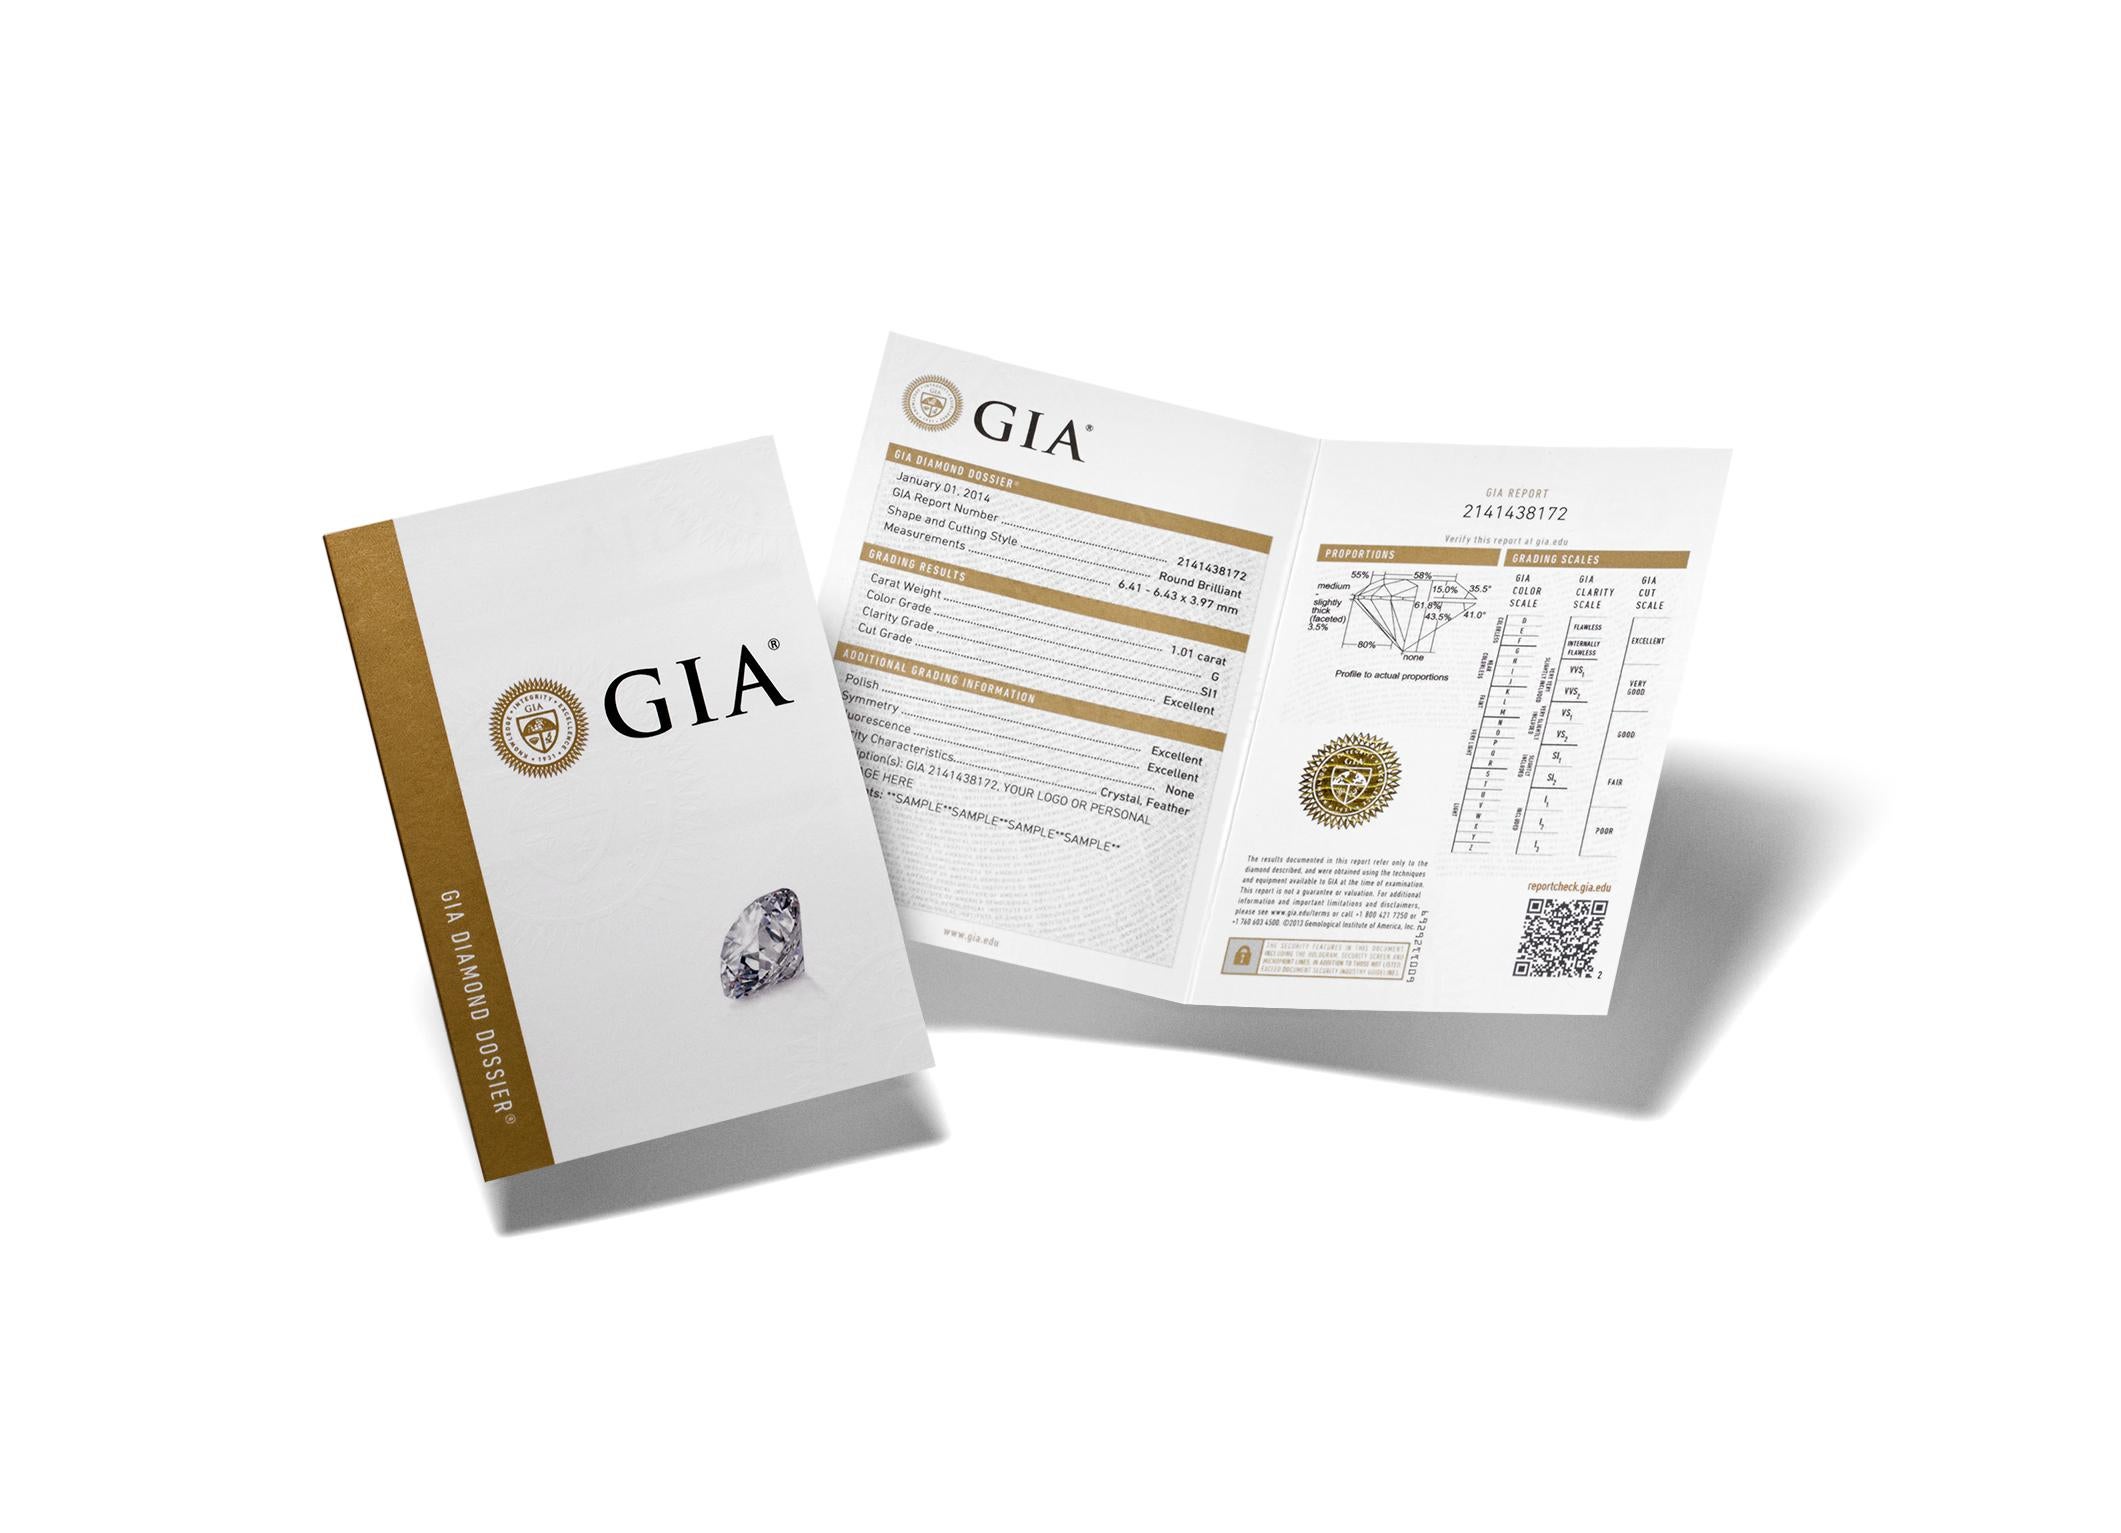 GIA Certified 0.50 Carat, G/VVS1, Brilliant Cut, Excellent Natural Diamond

Perfect Brilliants for perfect gifts.

5 C's:
Certificate: GIA
Carat: 0.50ct
Color: G
Clarity: VVS1(Very Very Slightly Included)
Cut: Excellent

Polish: Excellent
Symmetry: